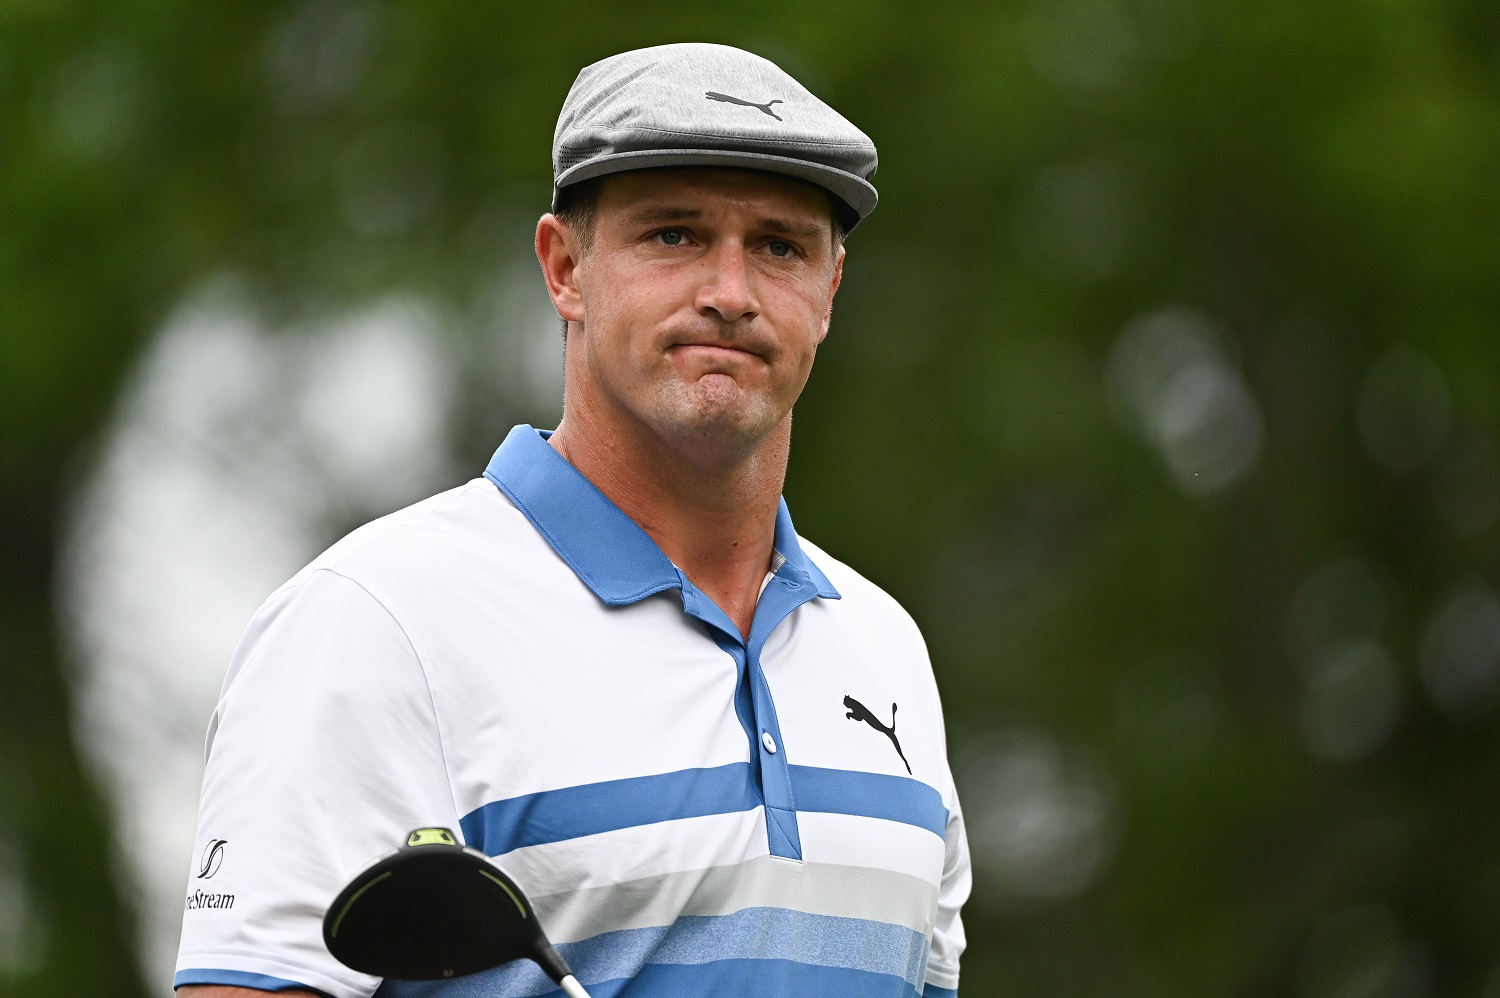 Bryson DeChambeau walks off the 18th tee during the first round of the Memorial Tournament at Muirfield Village Golf Club on June 4, 2021.